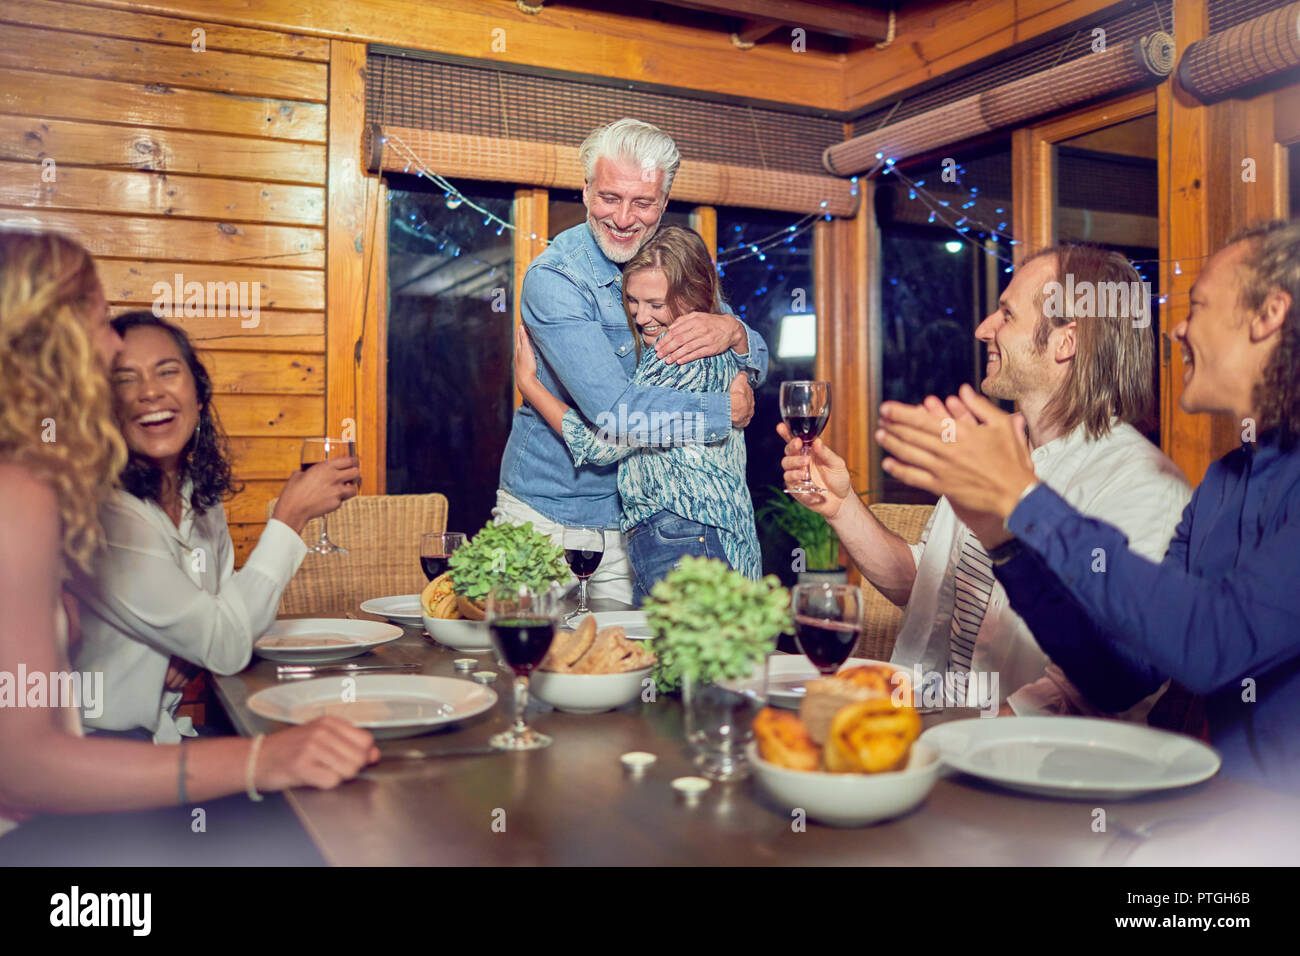 Friends clapping for affectionate couple hugging at dinner table Stock Photo